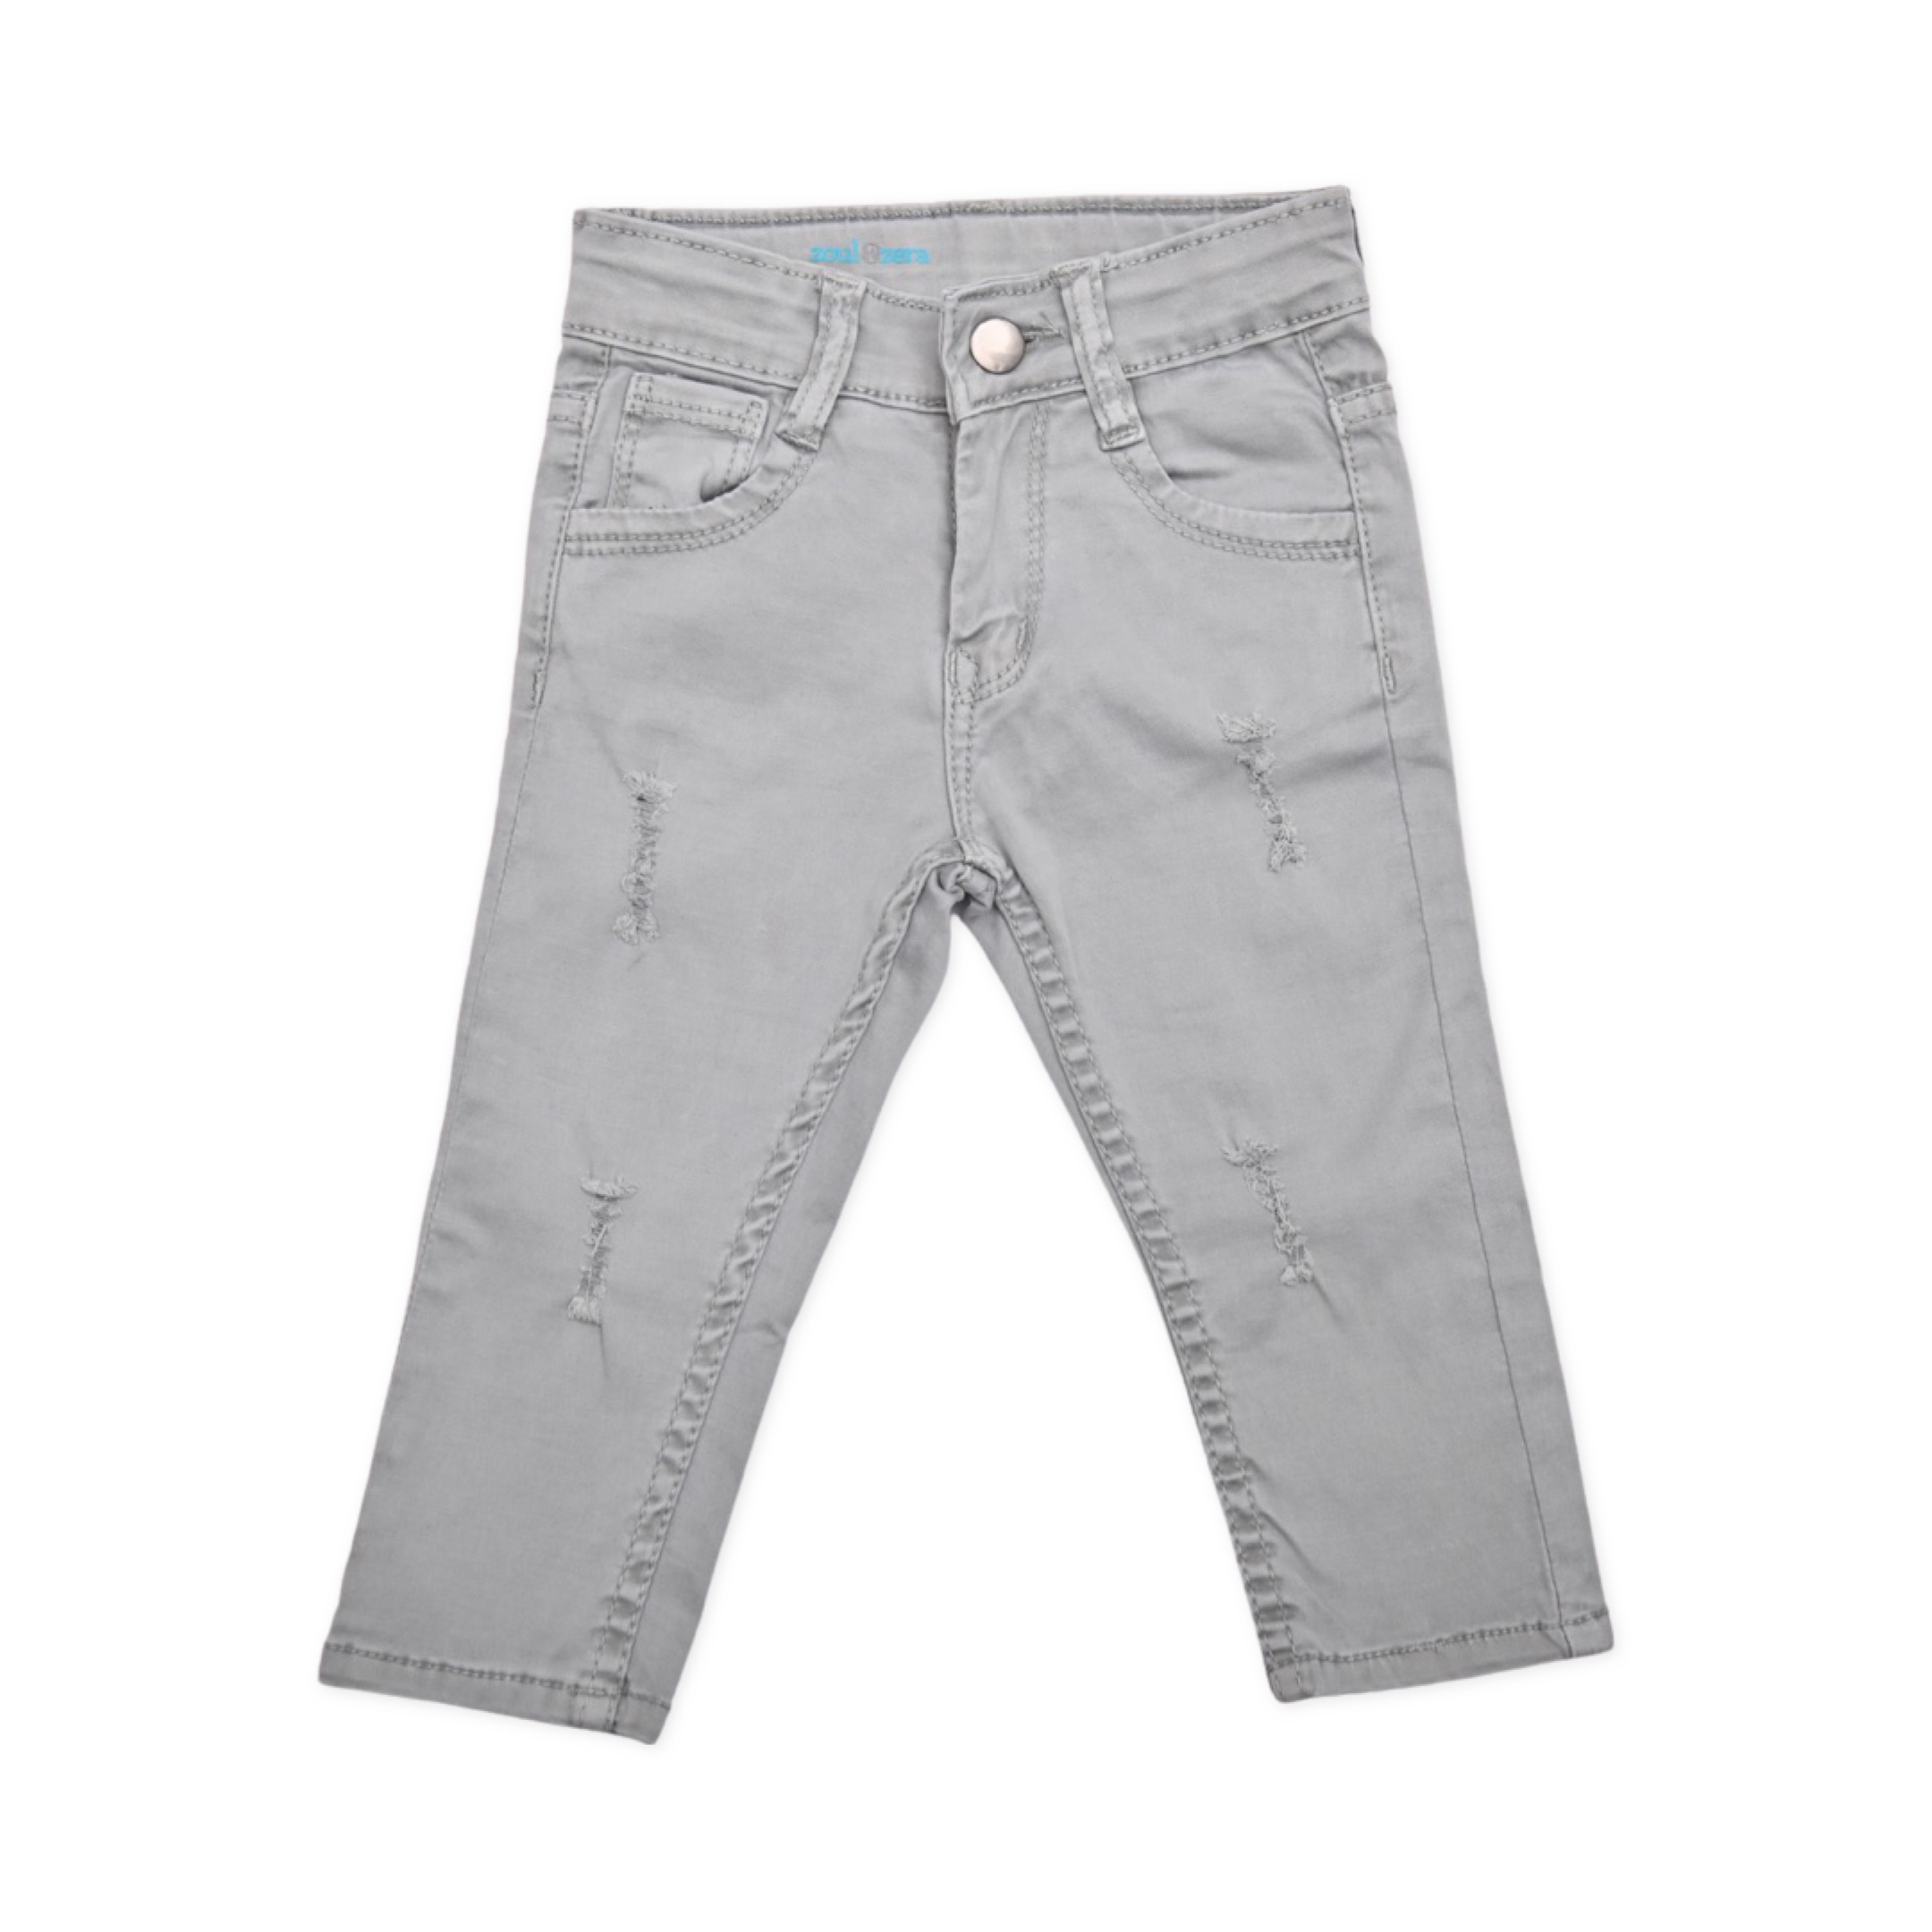 Zoul & Zera stylish & comfortable jeans with ripped design & side pockets for baby boys